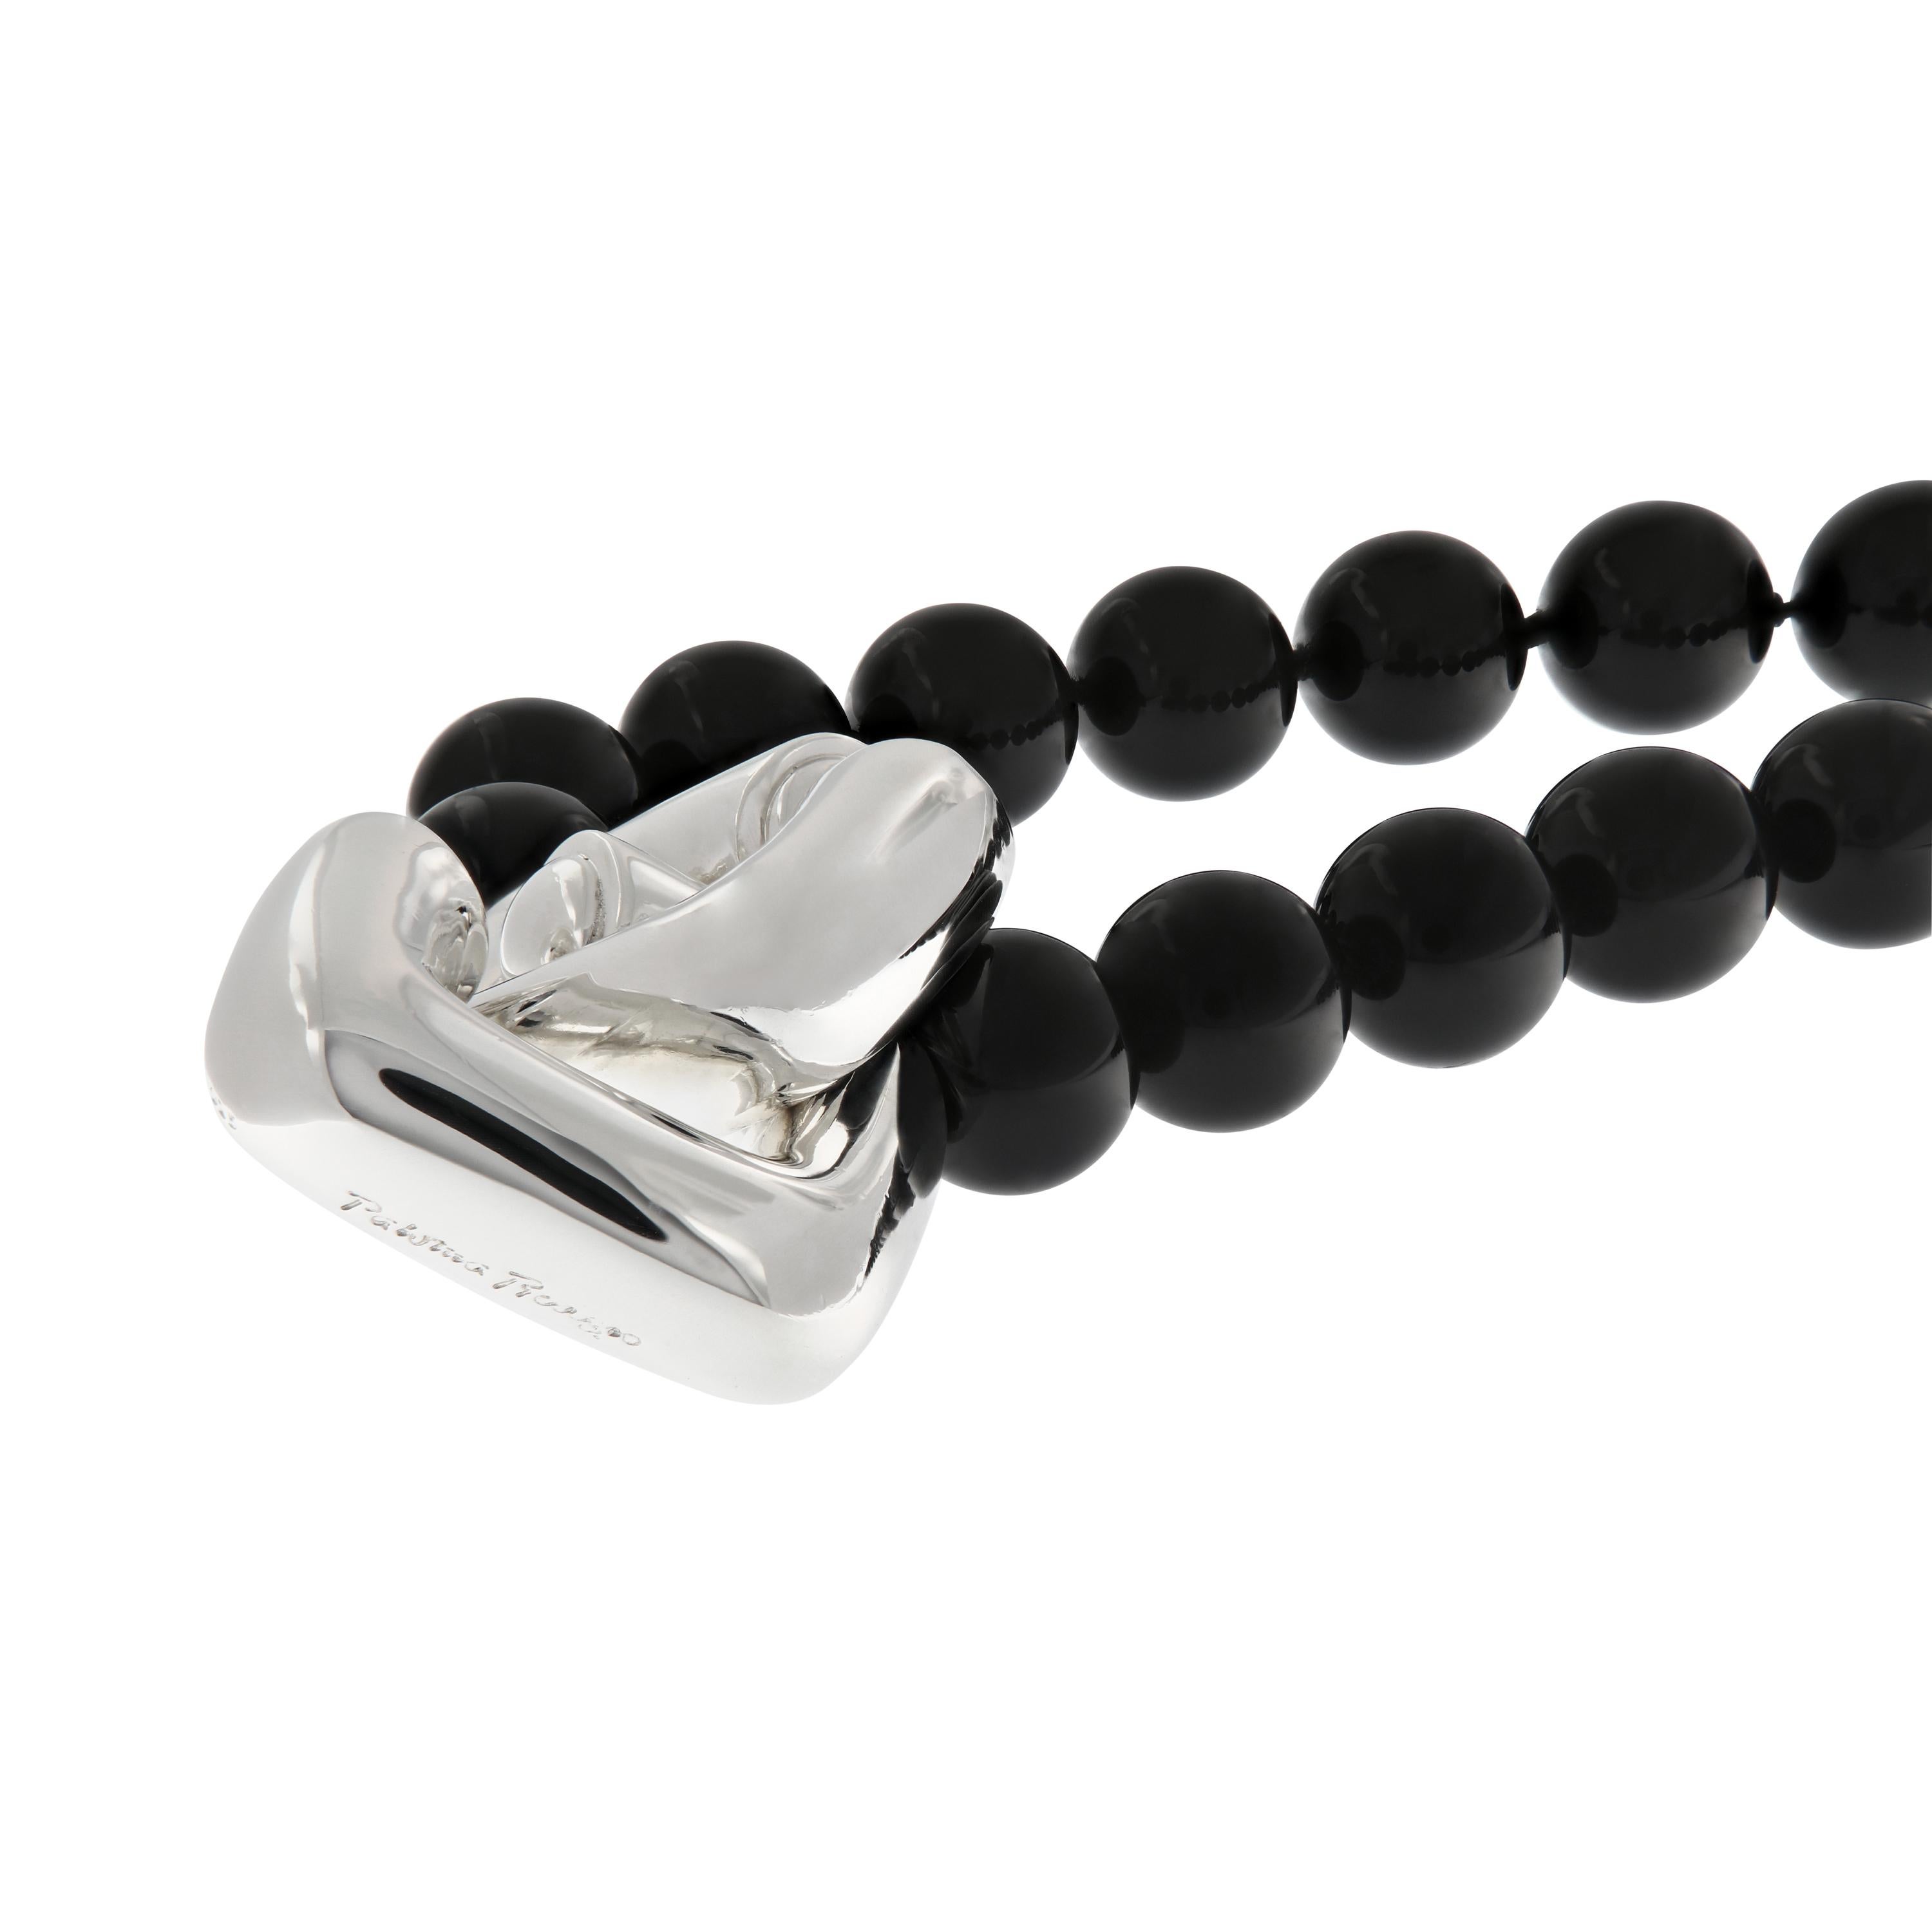 This necklace is crafted of beautifully polished spheres of black onyx with a large sterling silver two ring clasp. The necklace is 31 inches long. This estate piece is gently worn and comes with the original box and pouch. Weighs 179.1